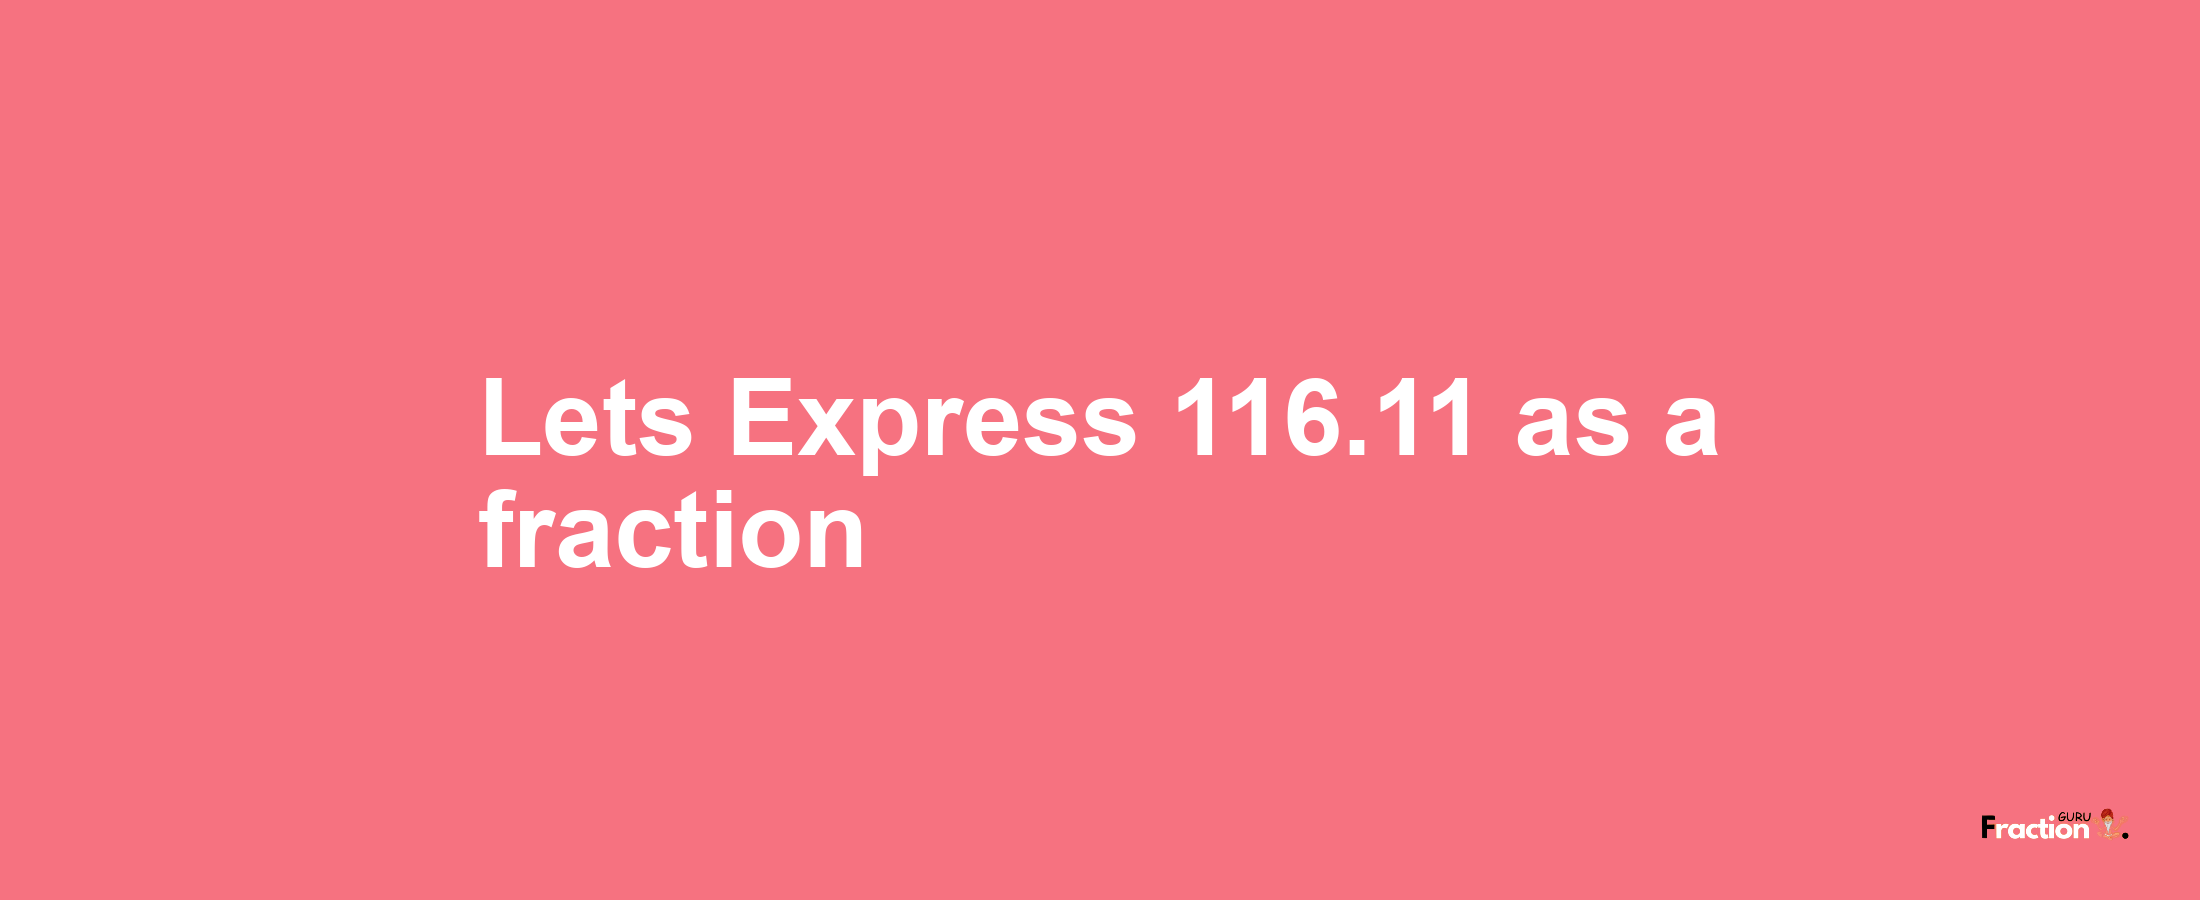 Lets Express 116.11 as afraction